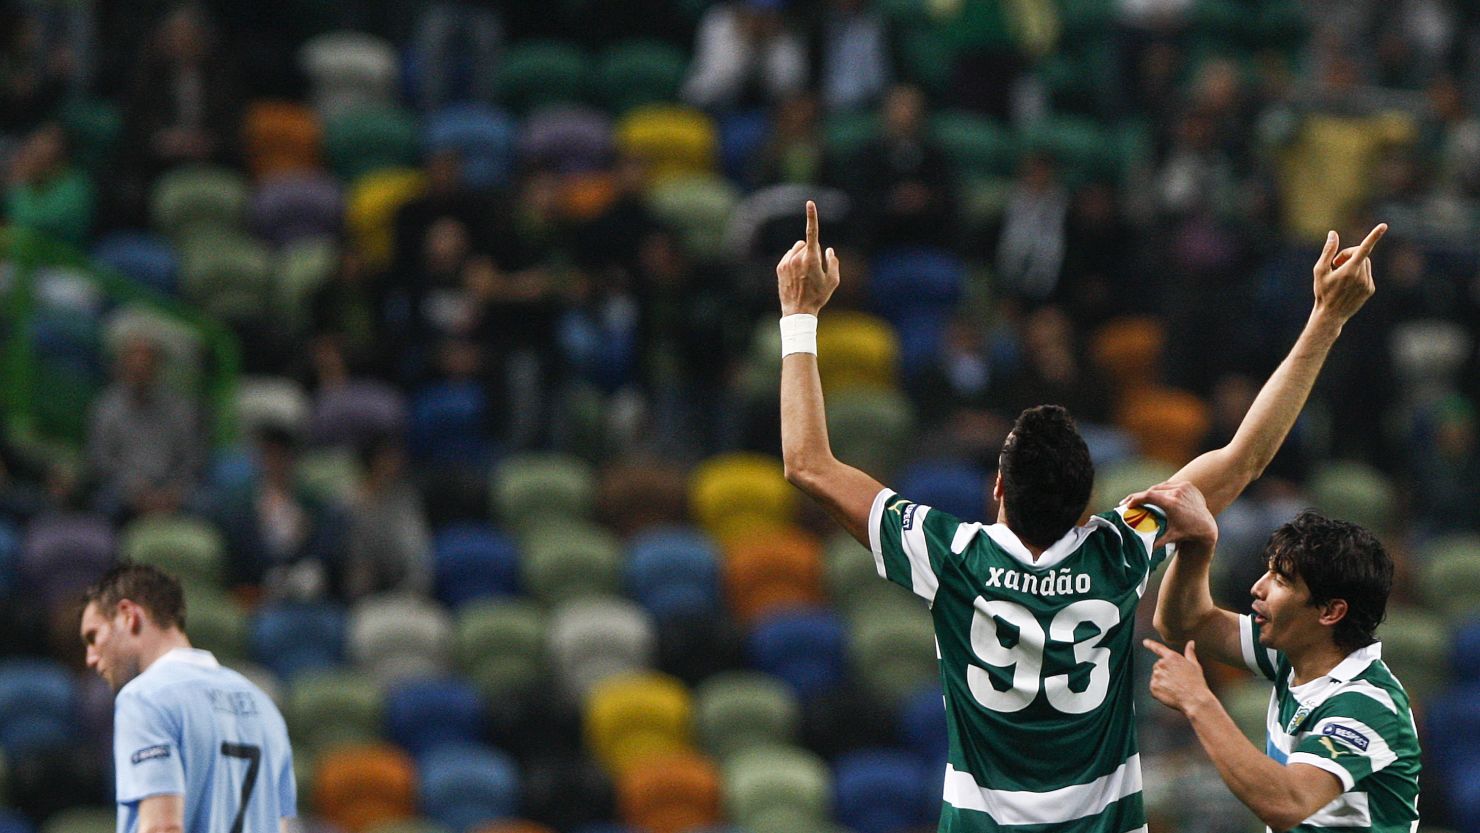 Sporting central defender Xandao celebrates his superb goal against Manchester City.